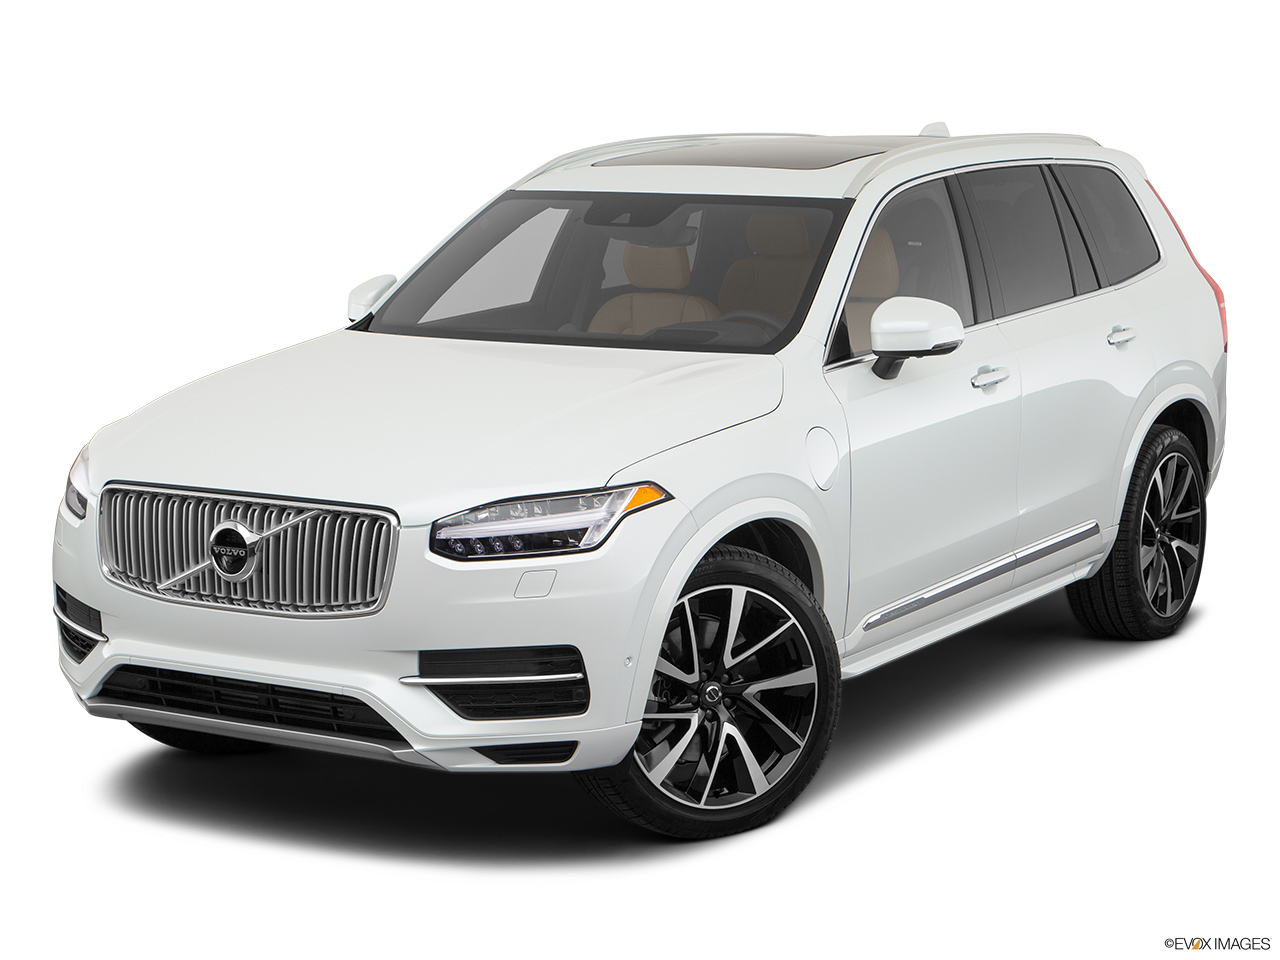 2018 Volvo XC90 T8 Inscription eAWD Plug-in Hybrid Front angle view. 